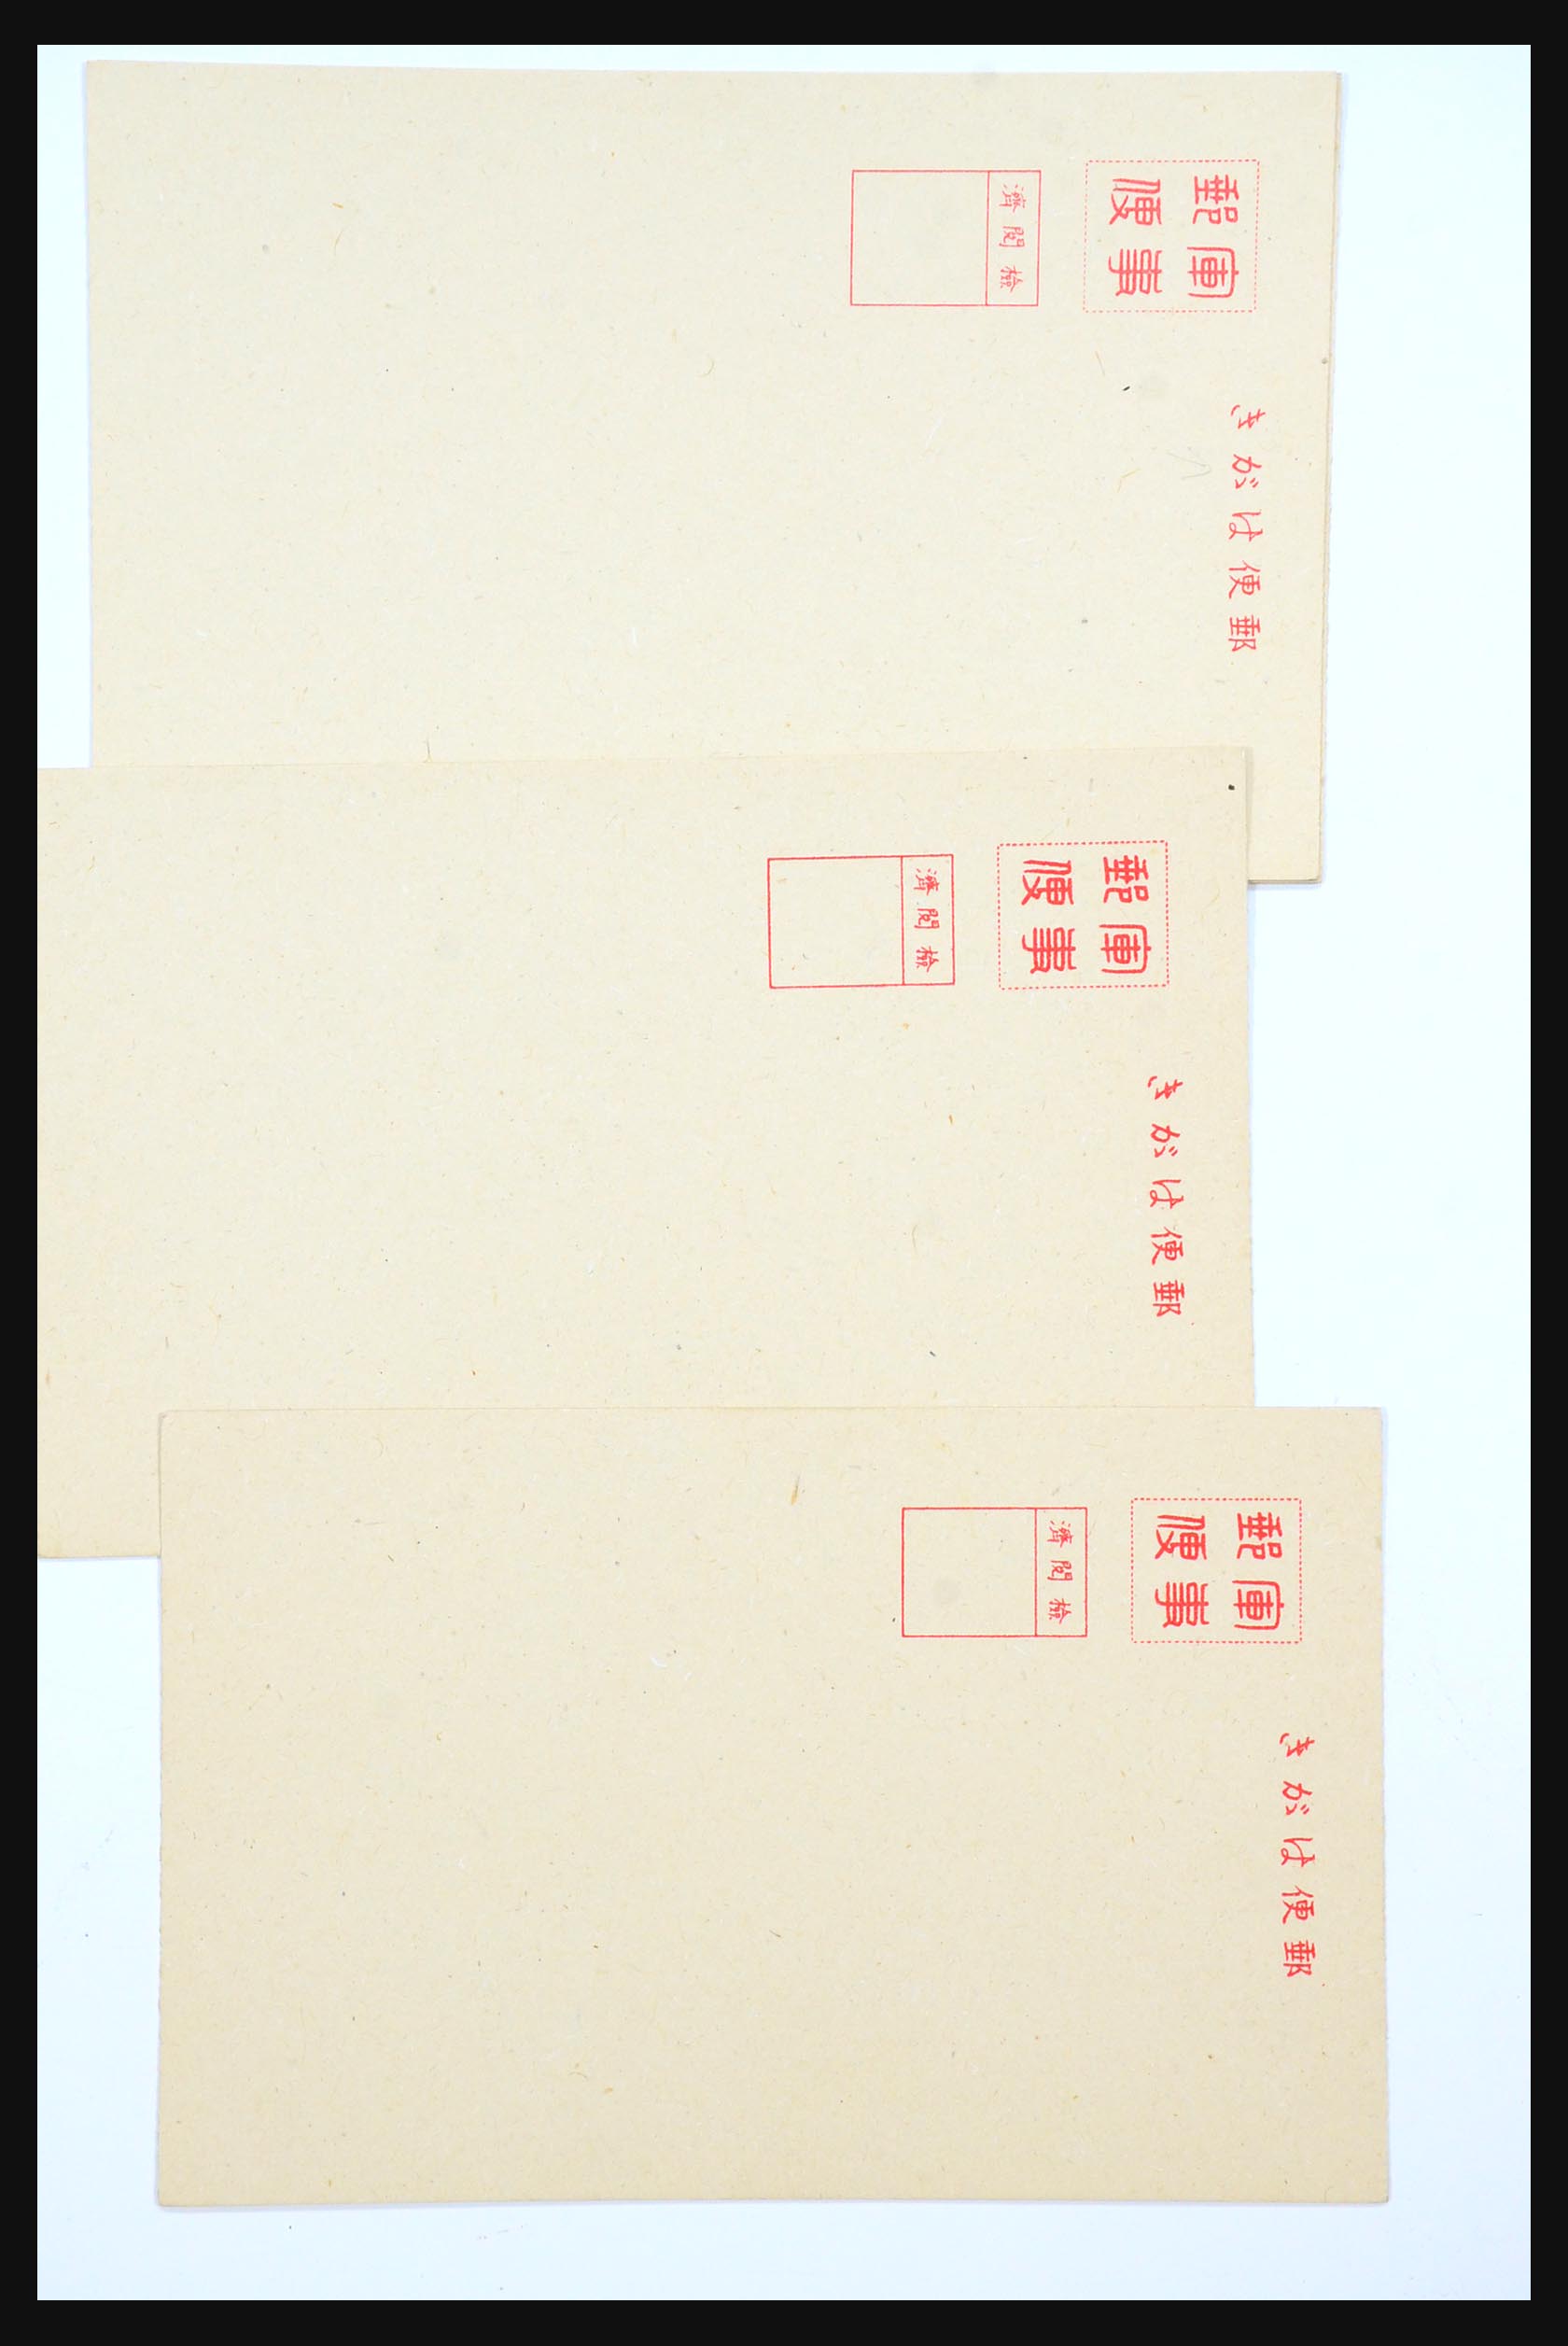 31362 056 - 31362 Netherlands Indies Japanese occupation covers 1942-1945.